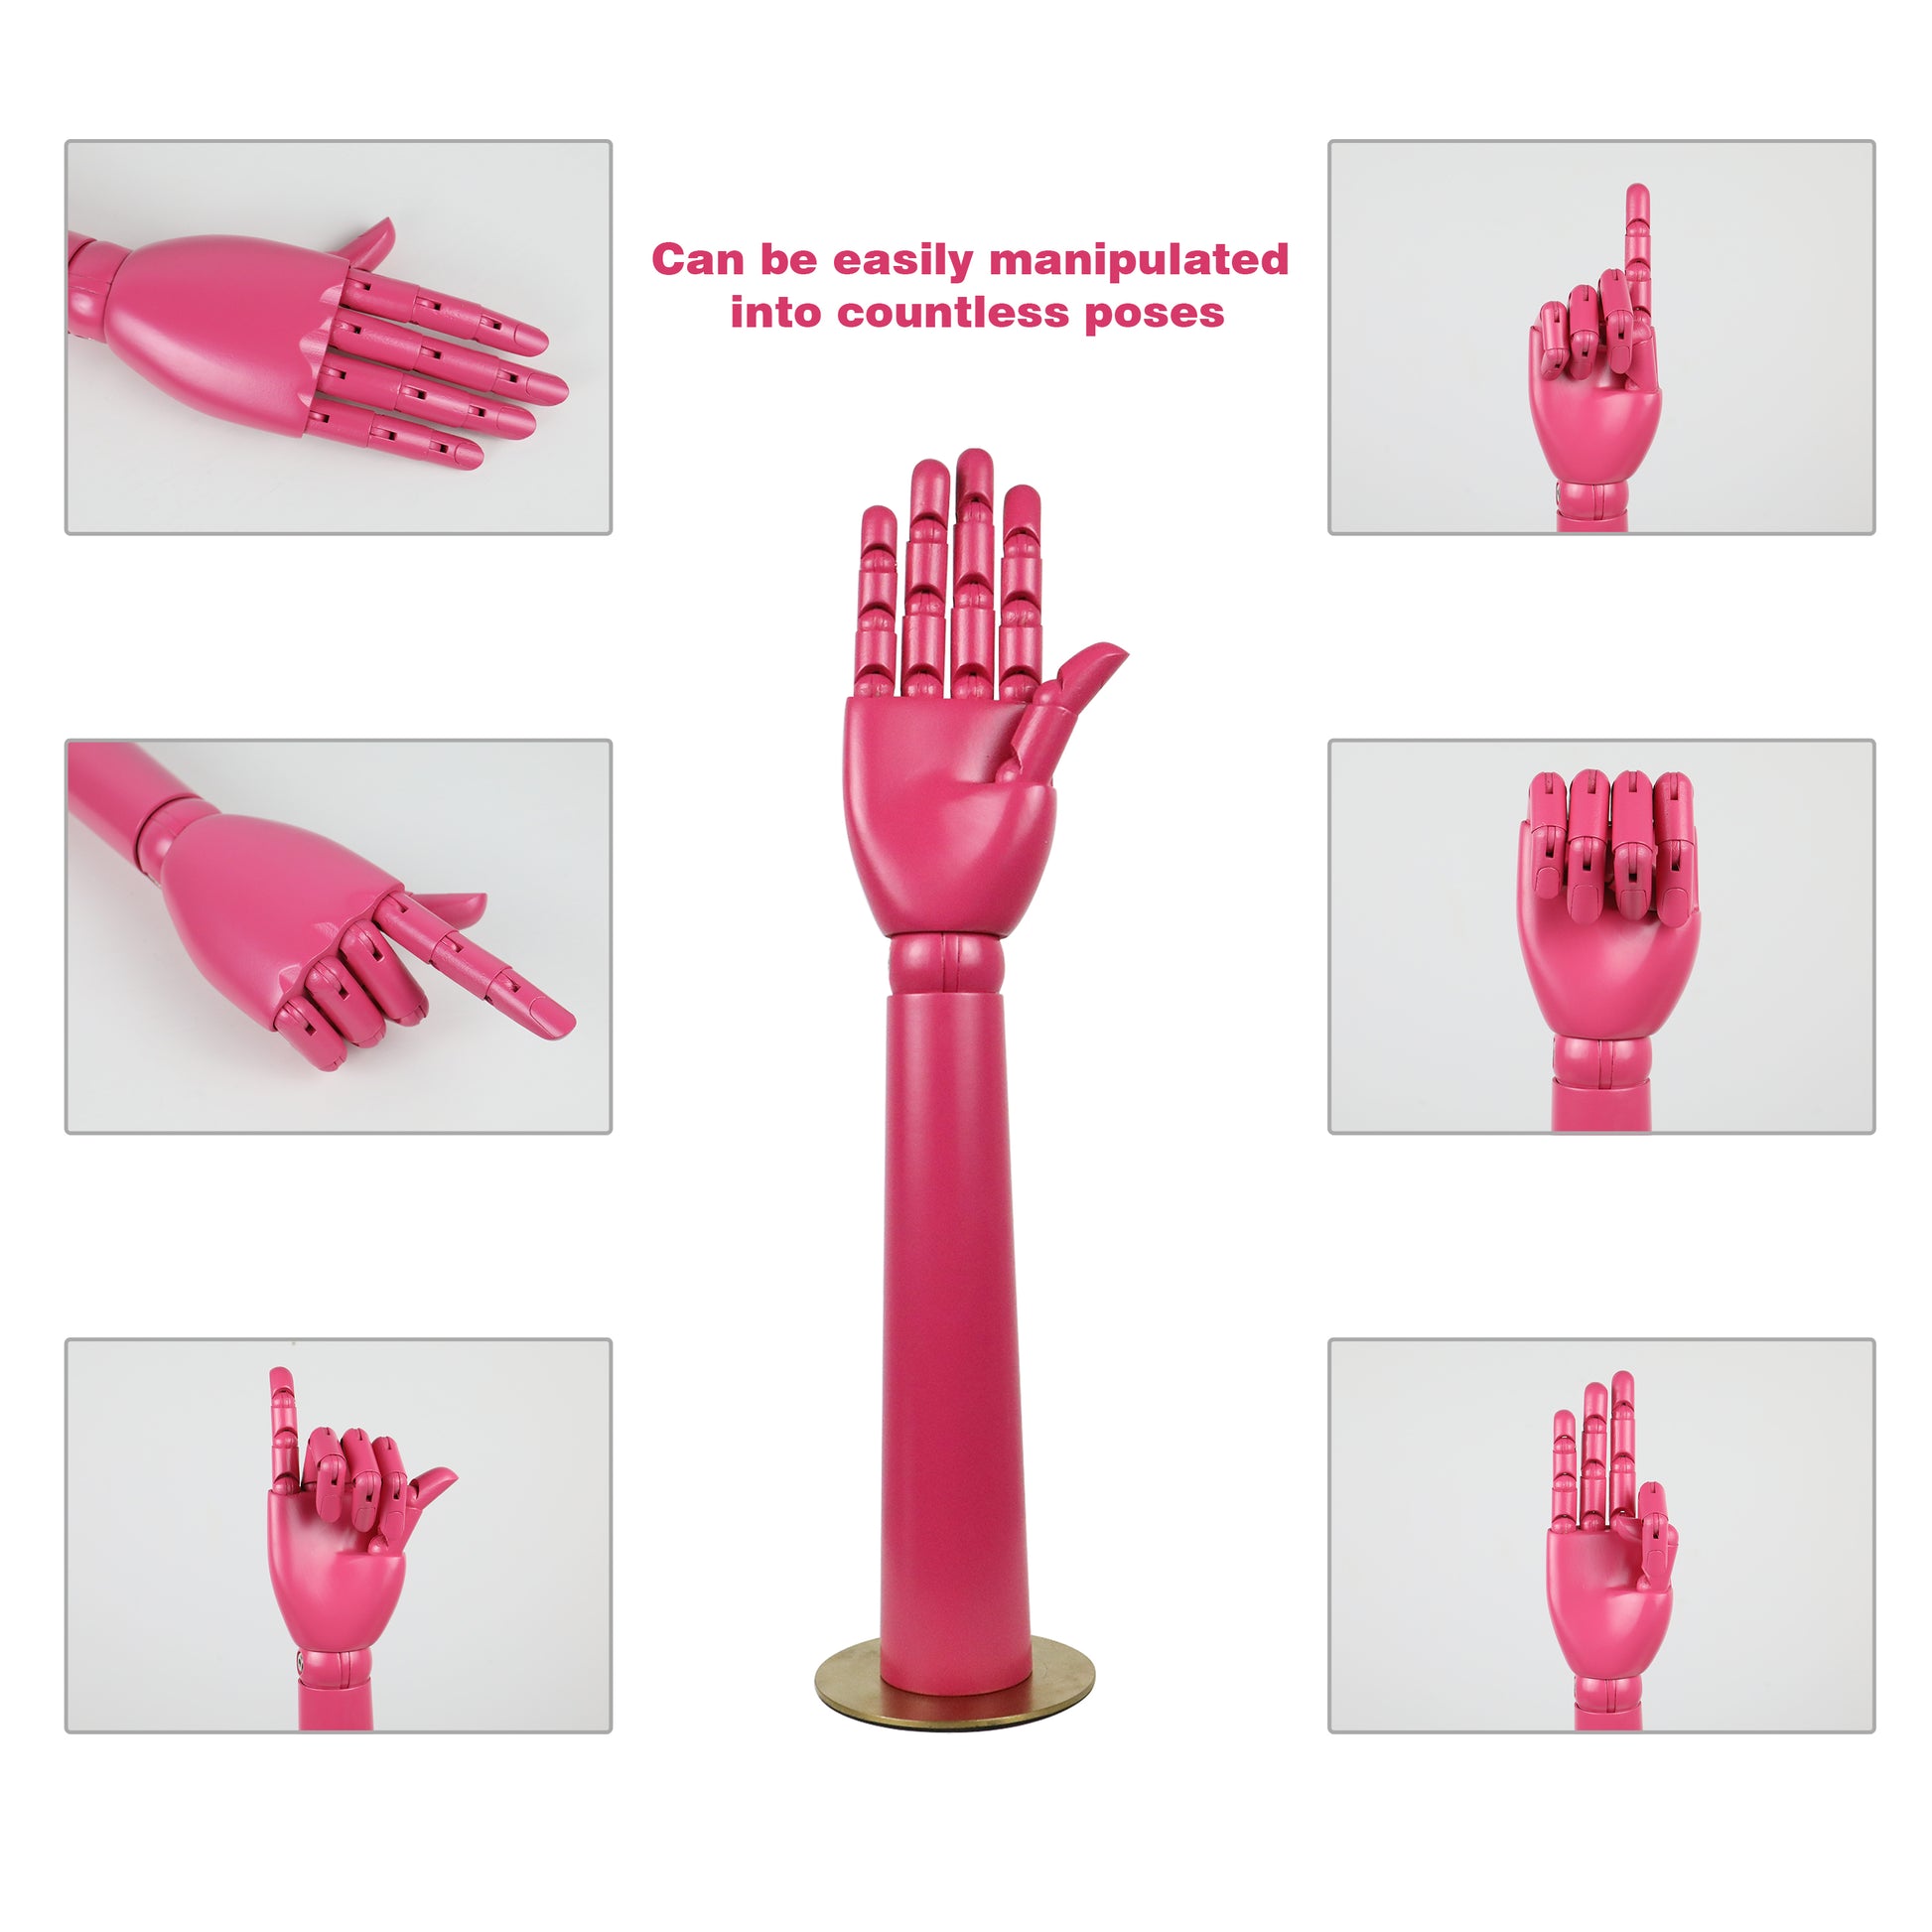 DE-LIANG Colorful Wood Hand Mannequin Right and Left Hands Model Prop, Movable Joints Wooden Hand for Jewelry Display/Table Decoration DE-LIANG